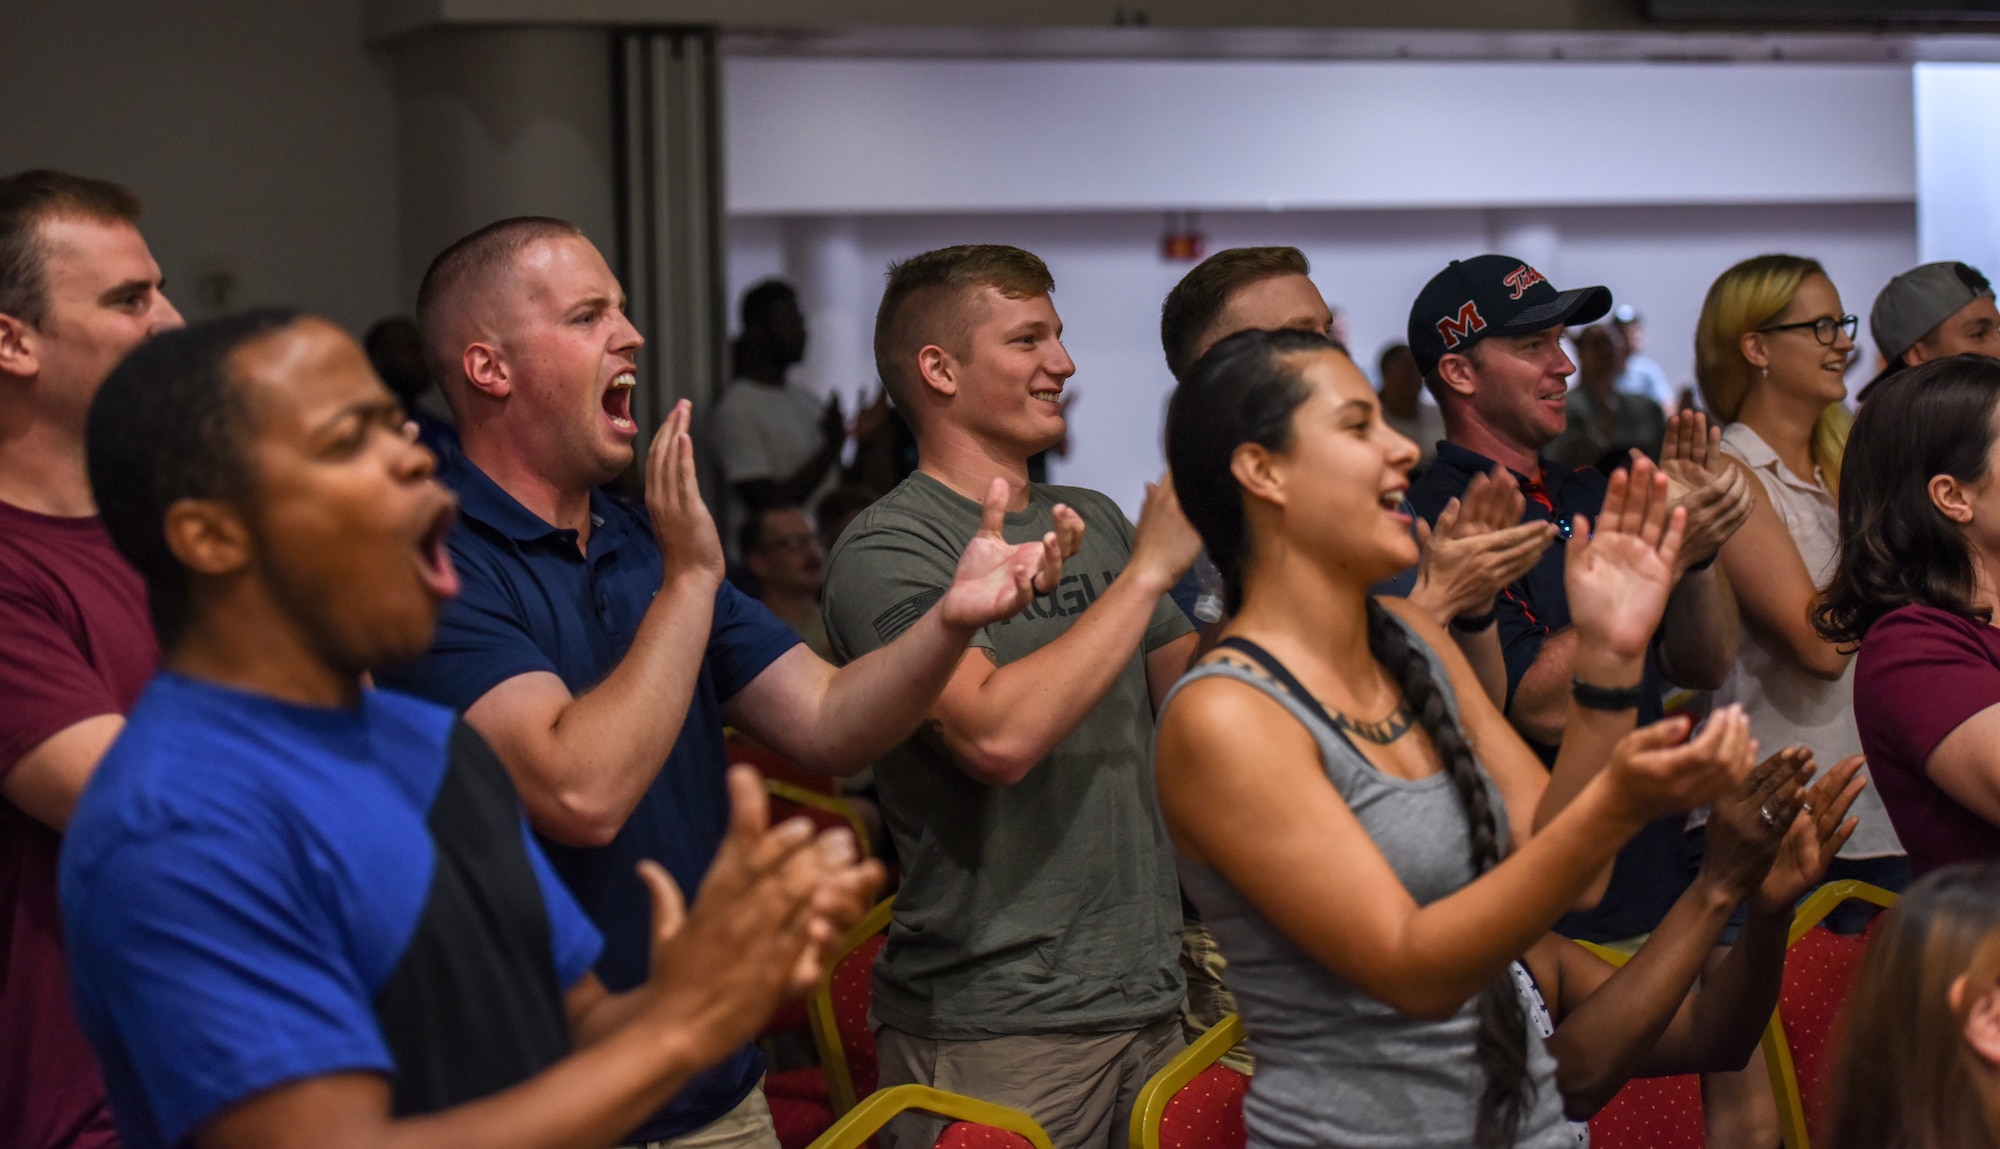 Airmen in a crowd cheer on a contestant at the men’s bodybuilding category during the Clash of the Titans competition at Incirlik Air Base, Turkey, 2018